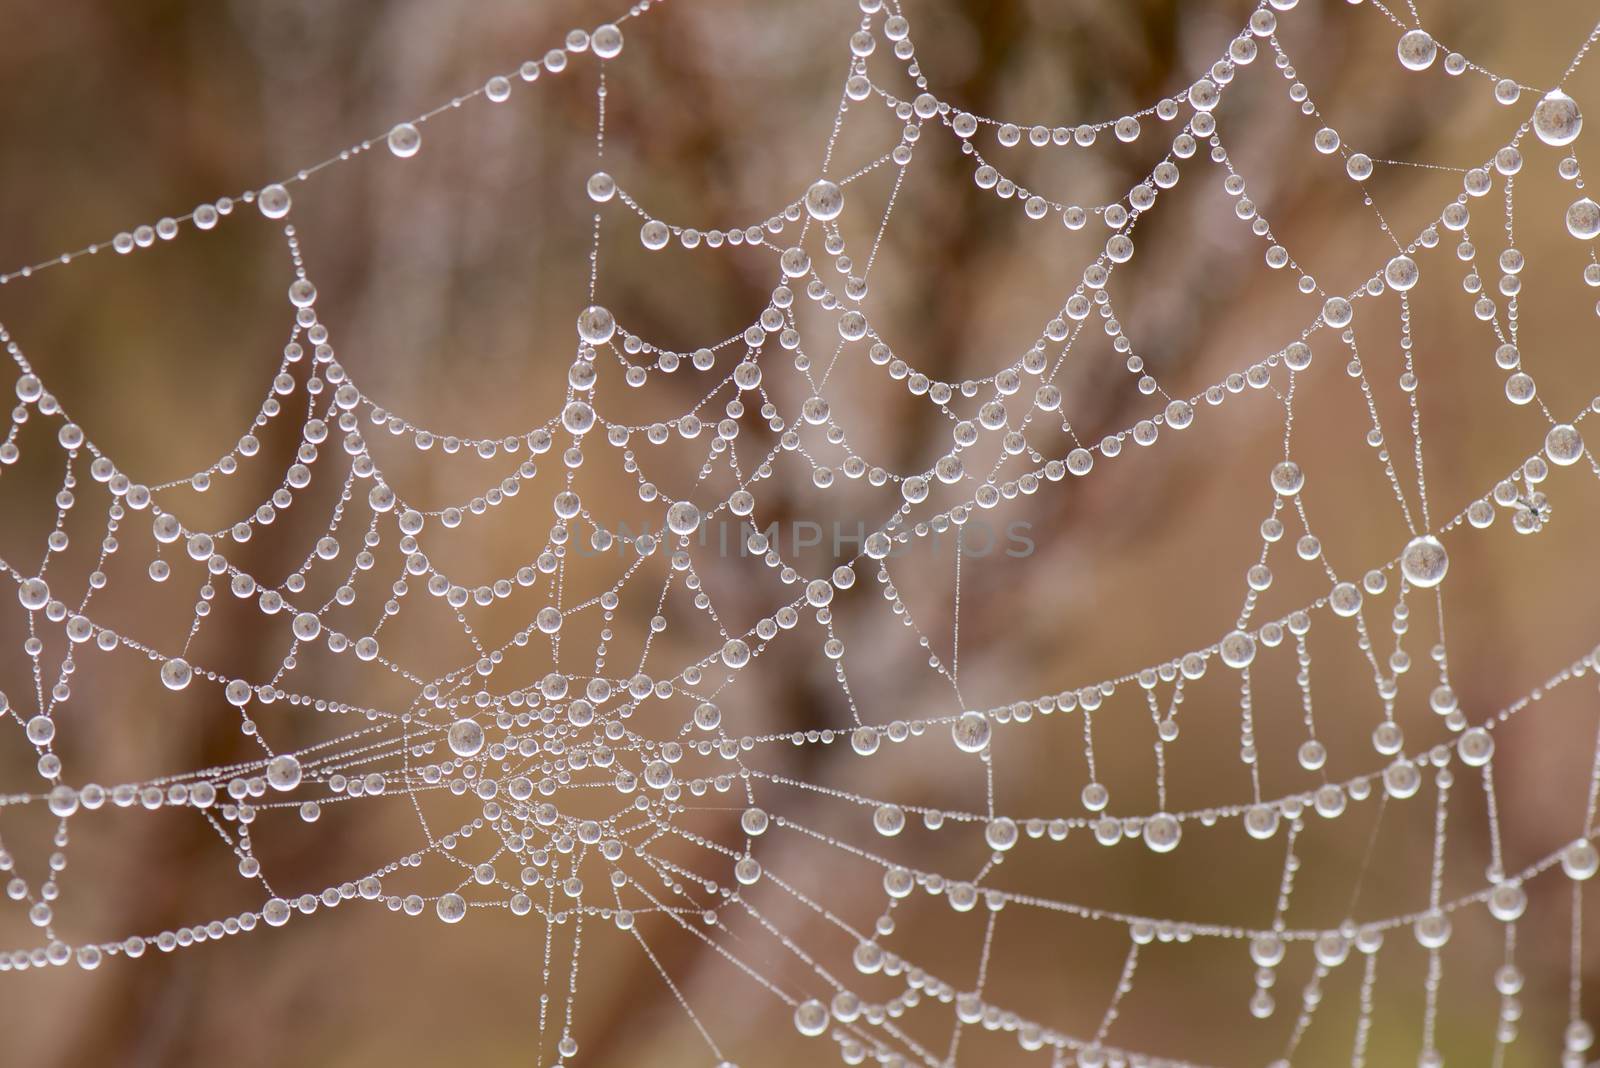 Spider Web with Pearl shaped dew drops by Tofotografie